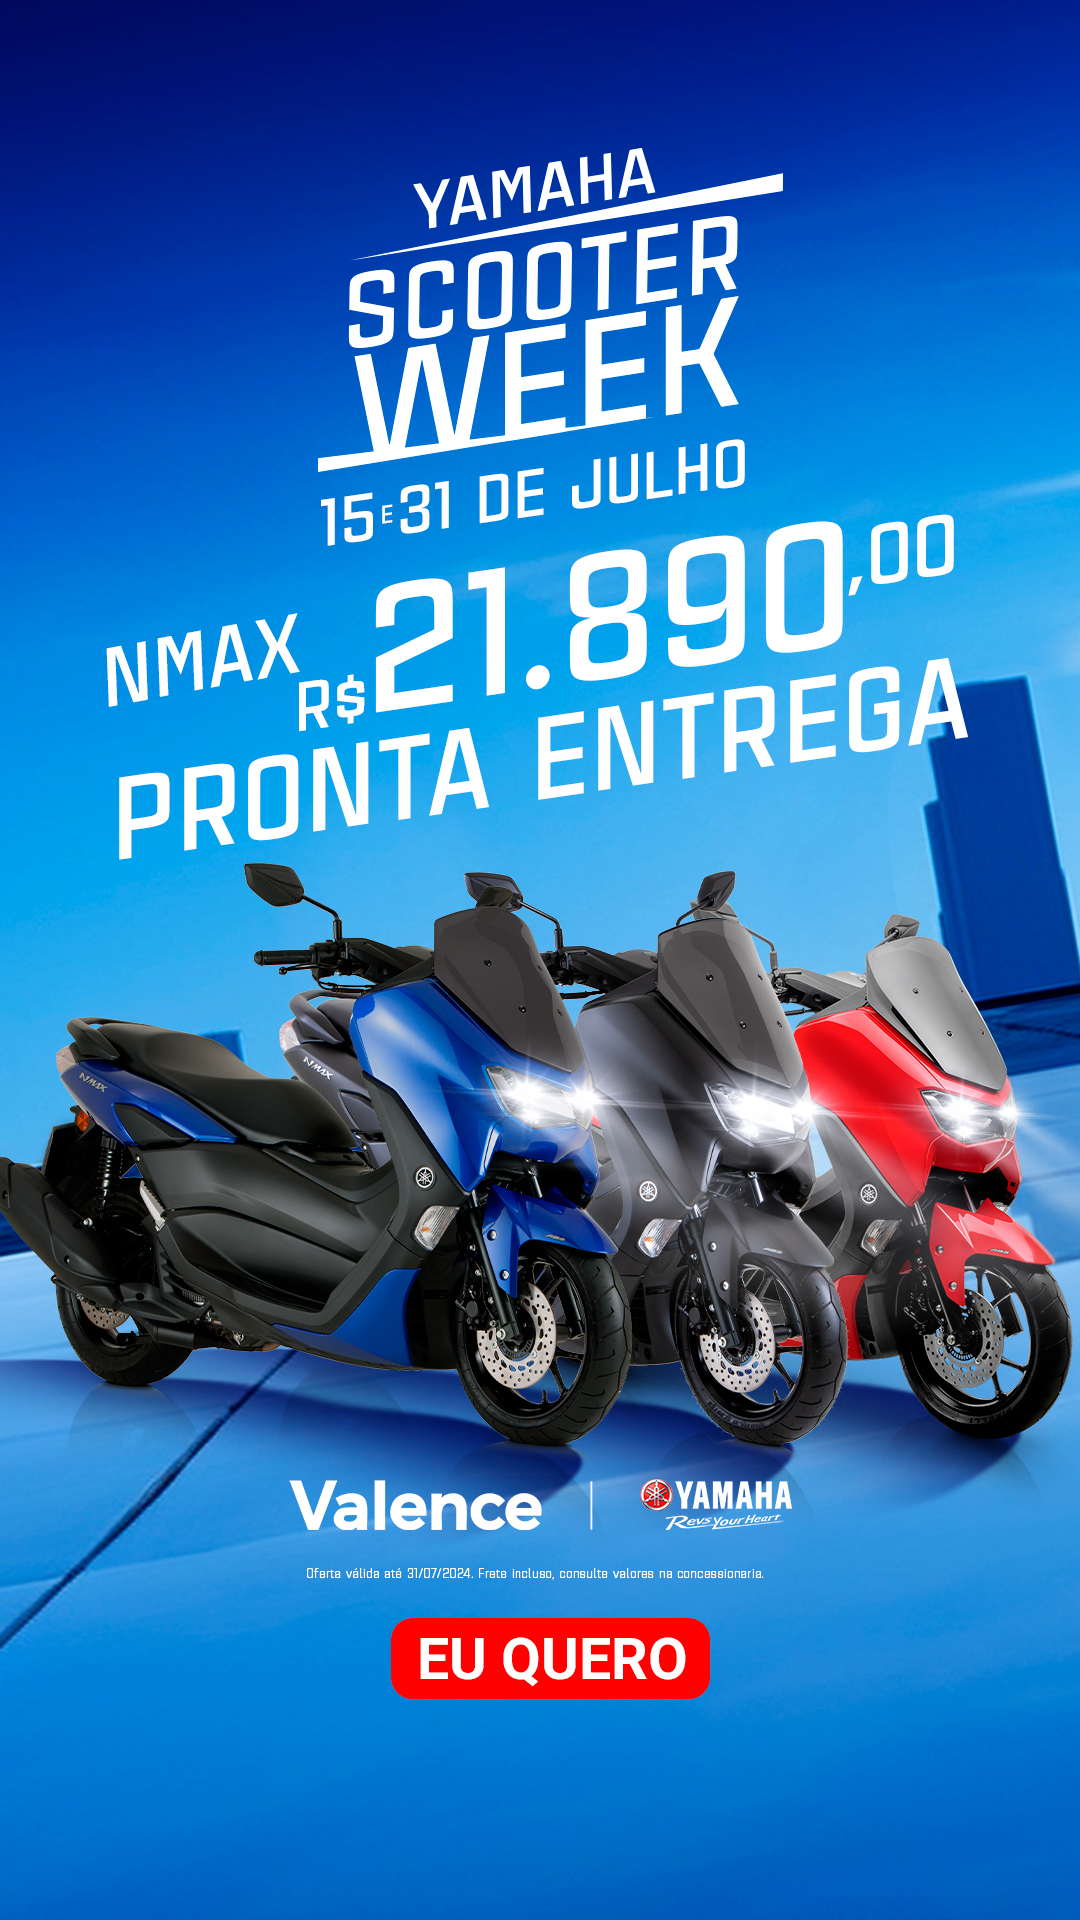 NMAX CONNECTED 160 ABS